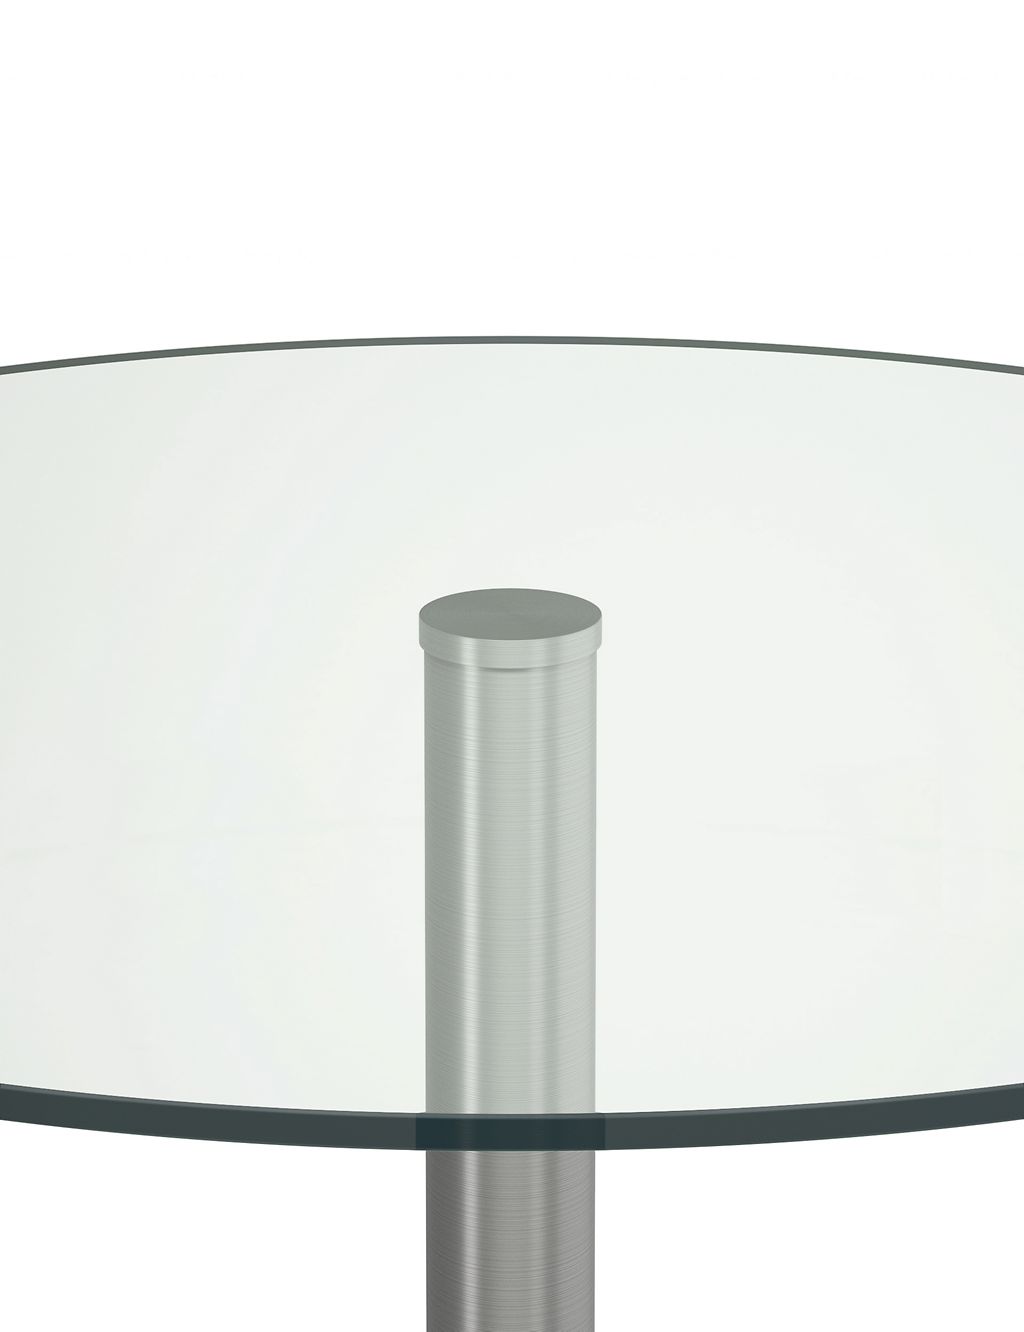 Huxley Round 4 Seater Dining Table 2 of 7